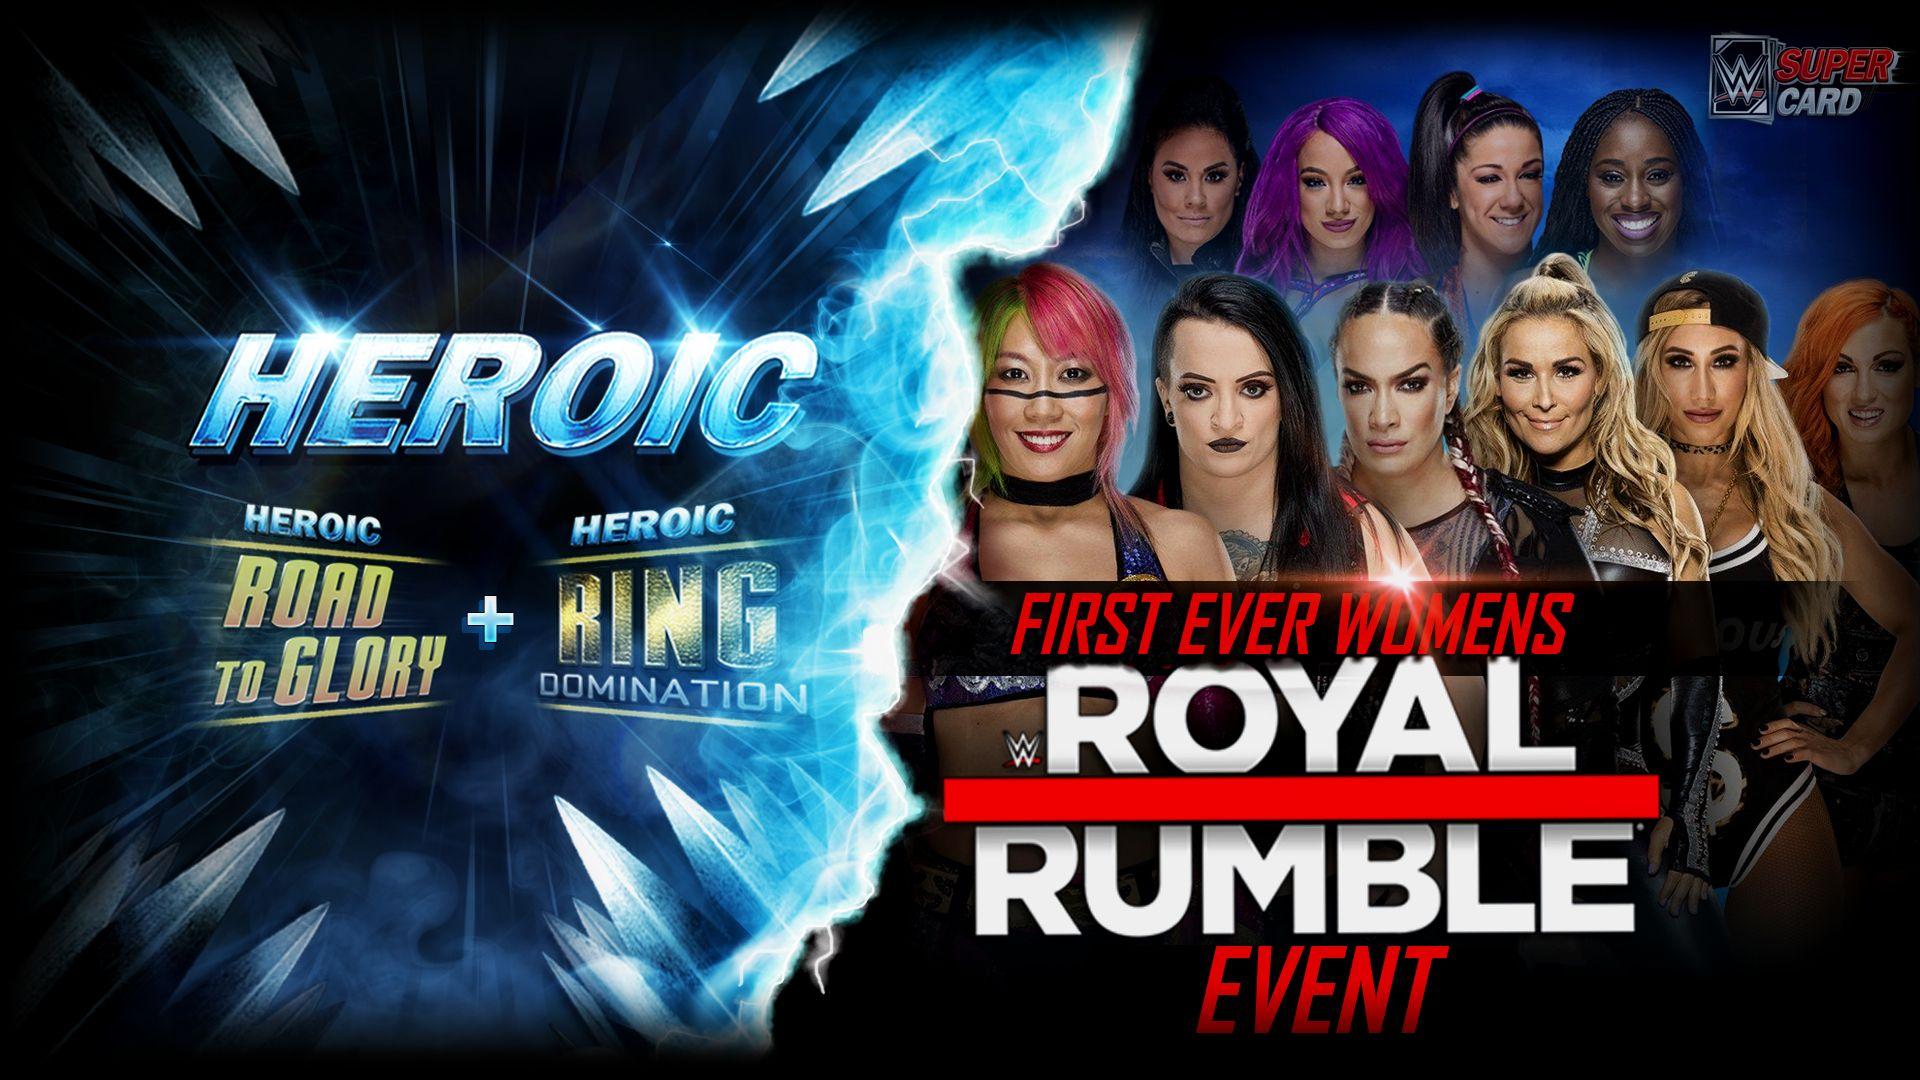 WWE SuperCard unveils Women's Royal Rumble mode and new Heroic